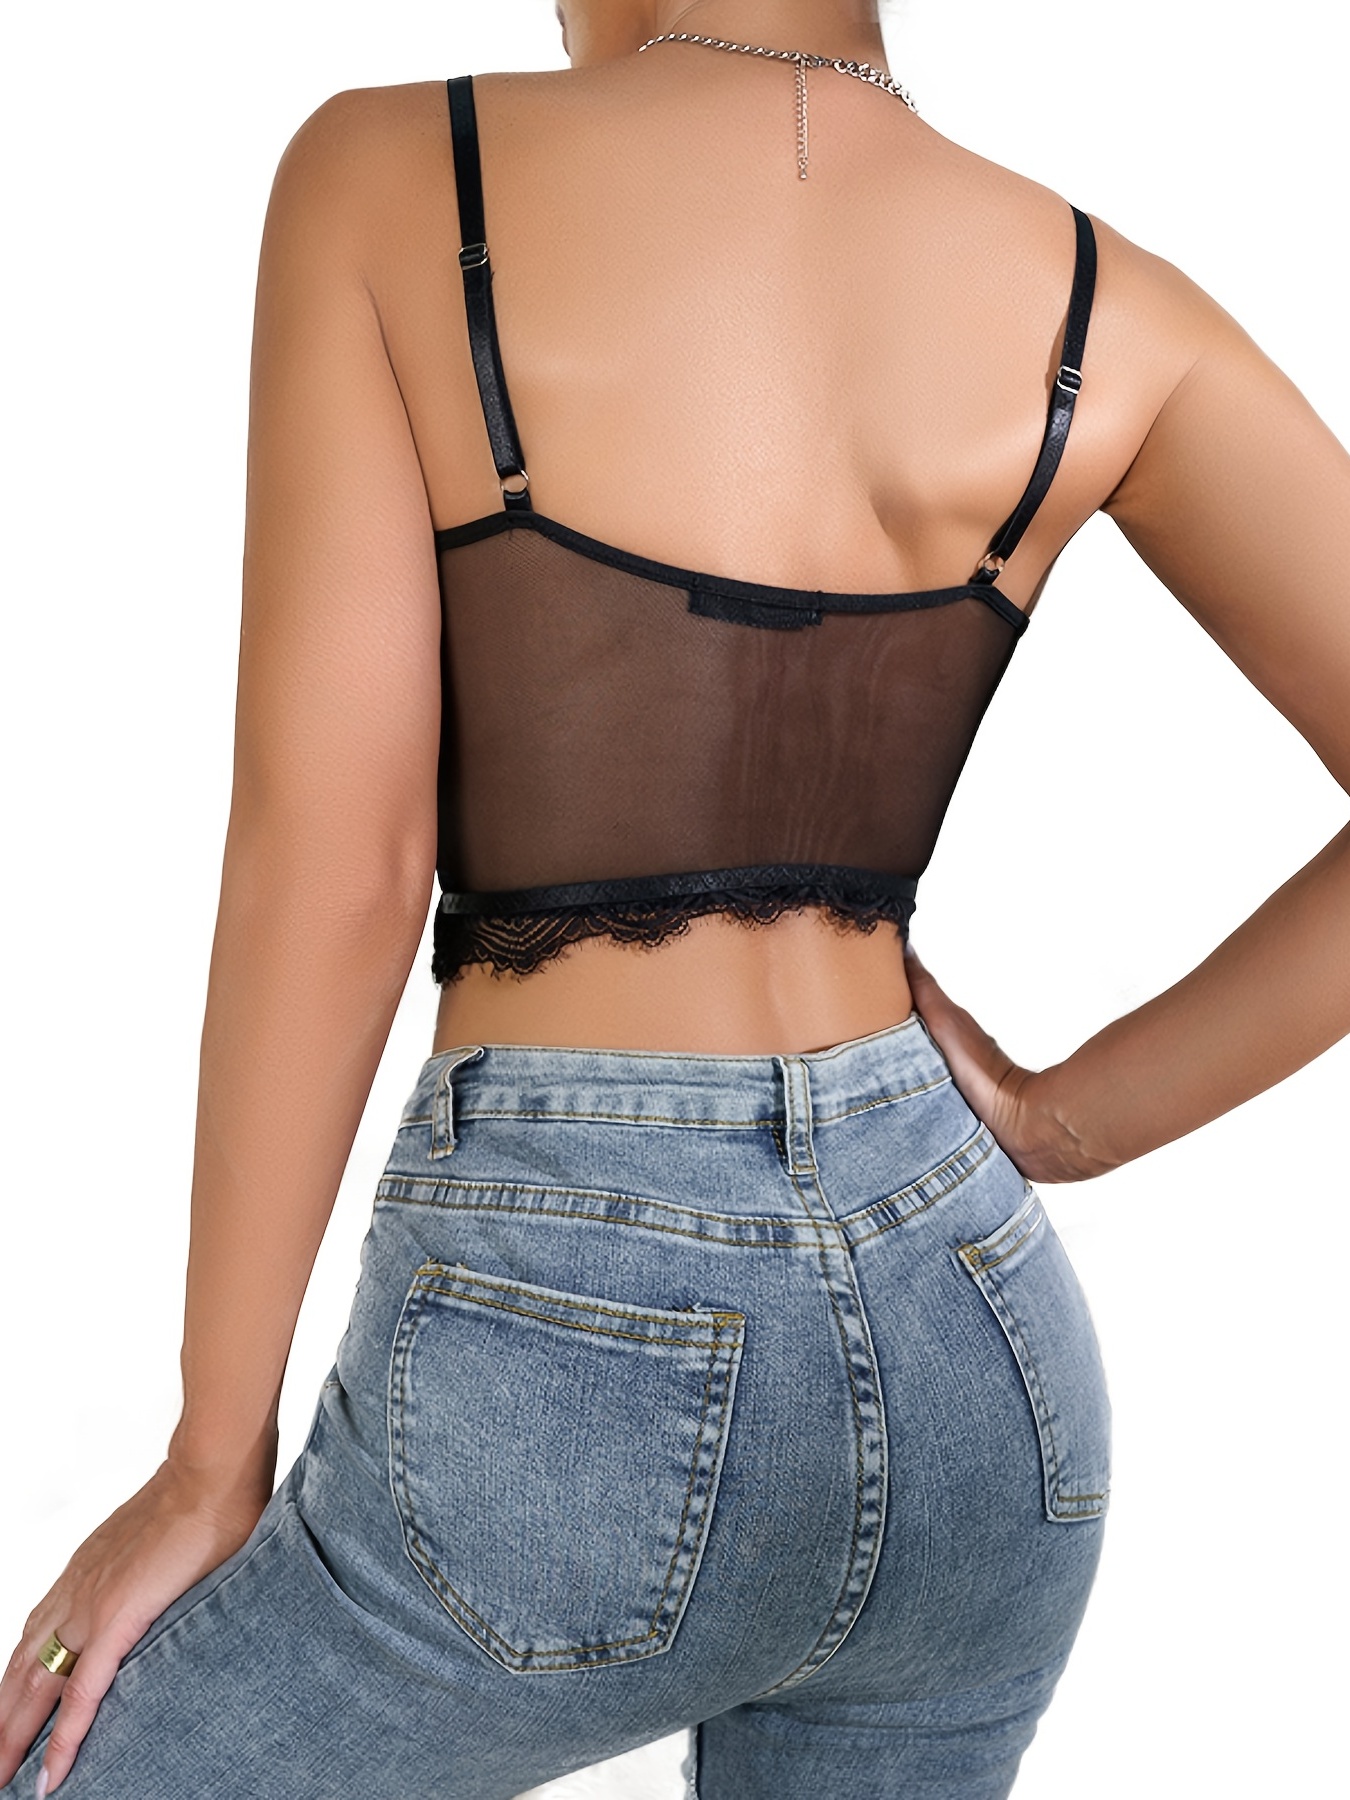 Women's Tank Top Sexy Lace Street Style Black Cami Corset Tops